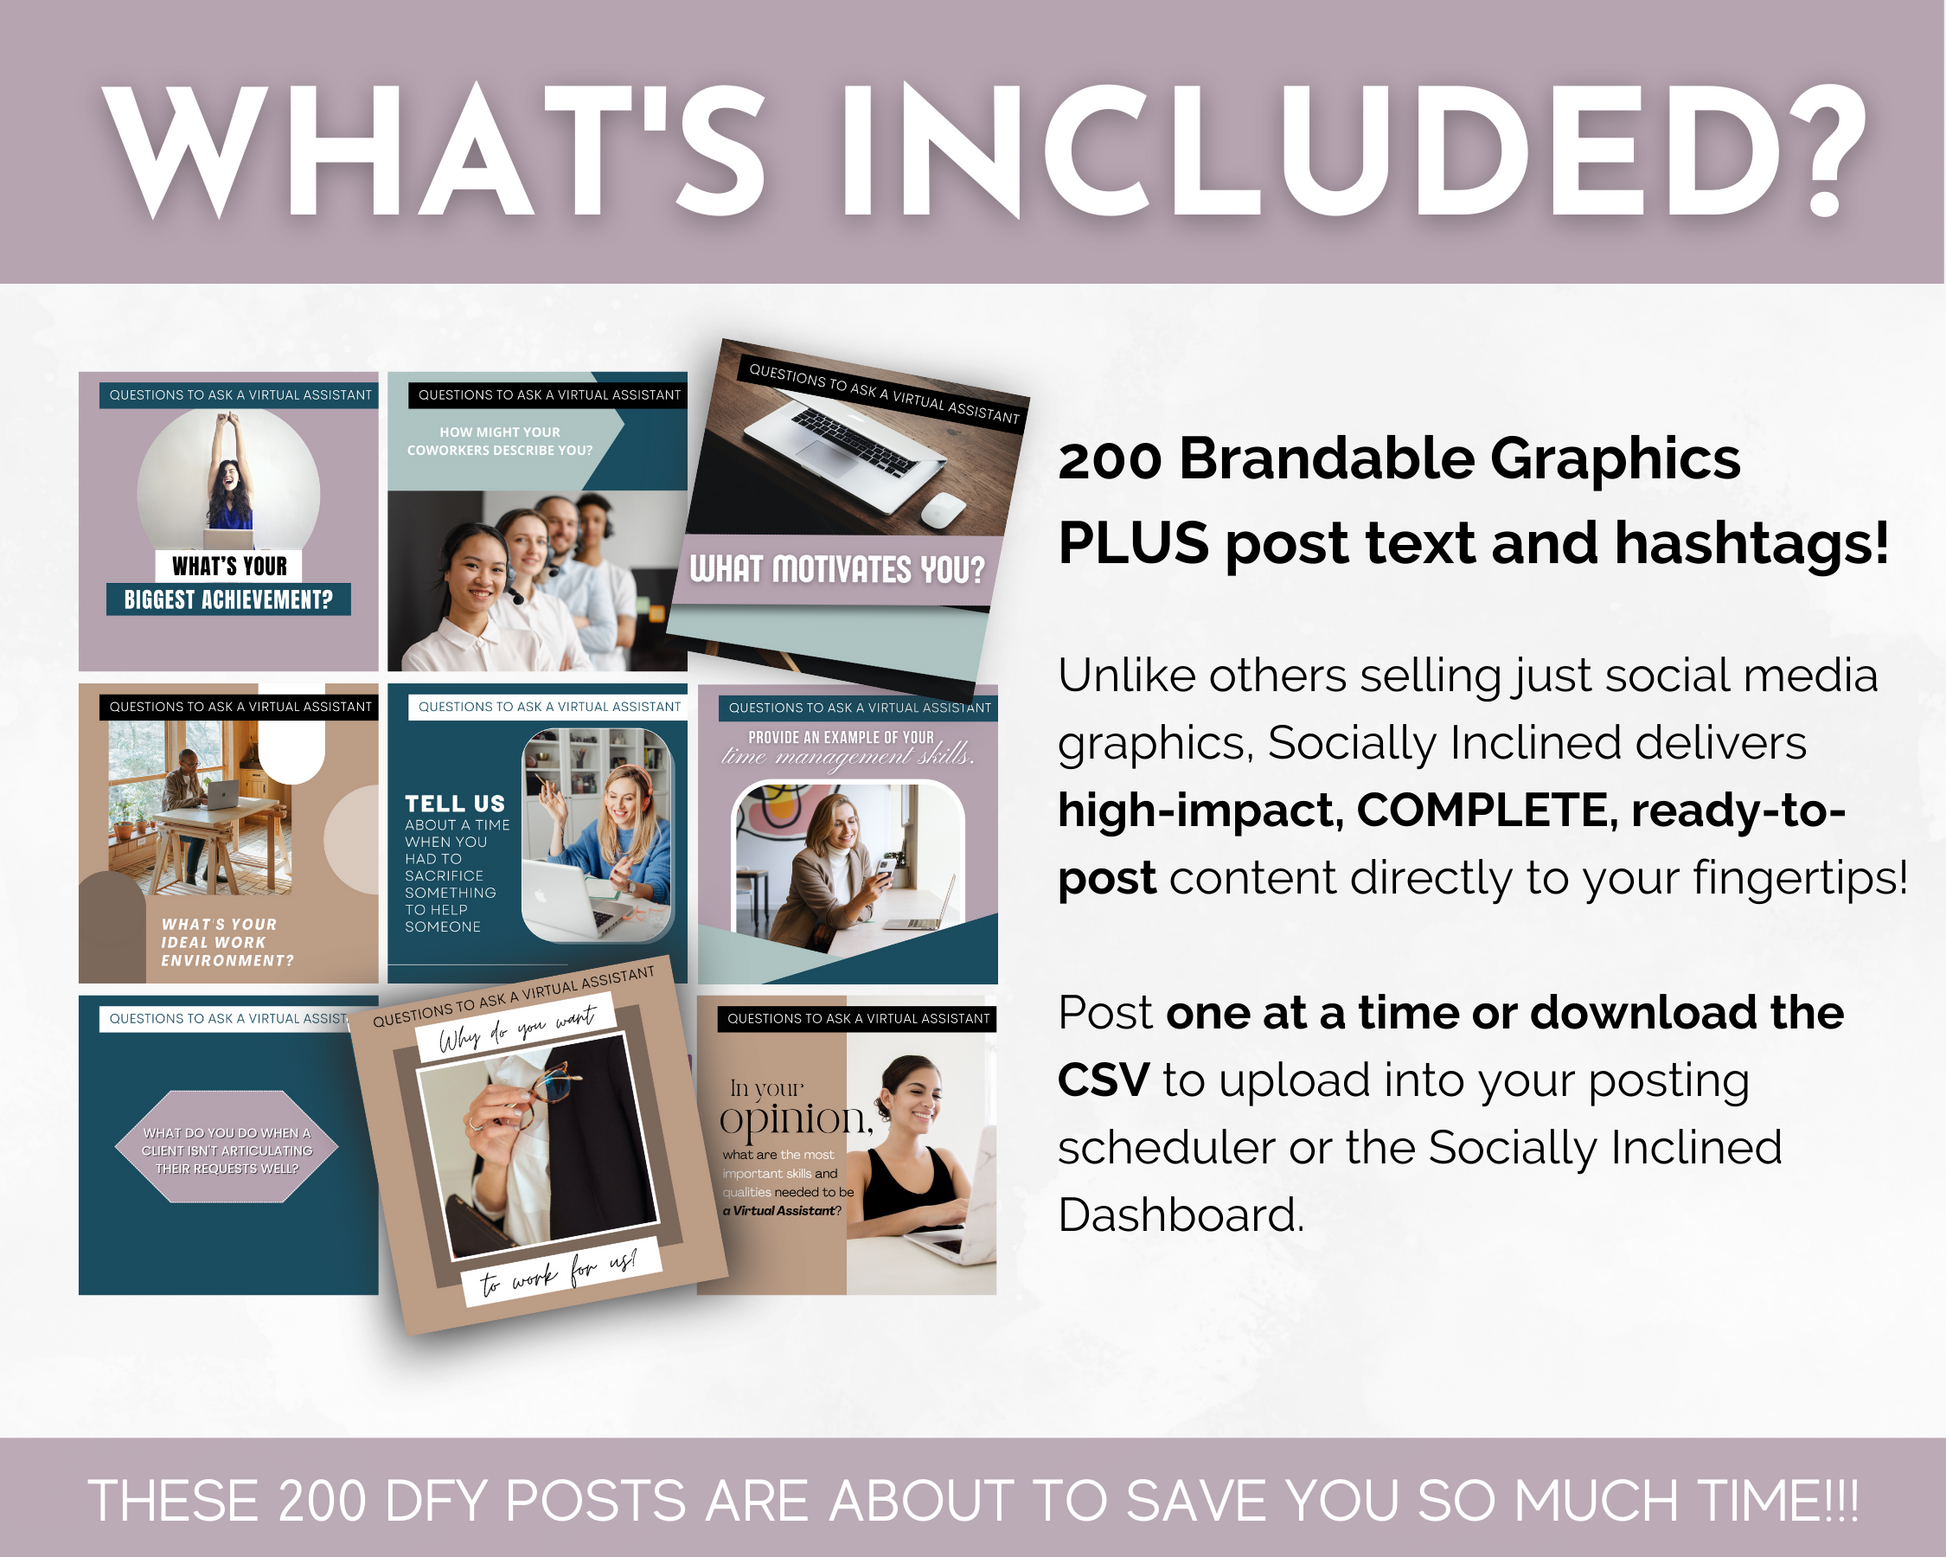 Discover what's included in the Virtual Assistant Social Media Post Bundle with Canva Templates from Socially Inclined.